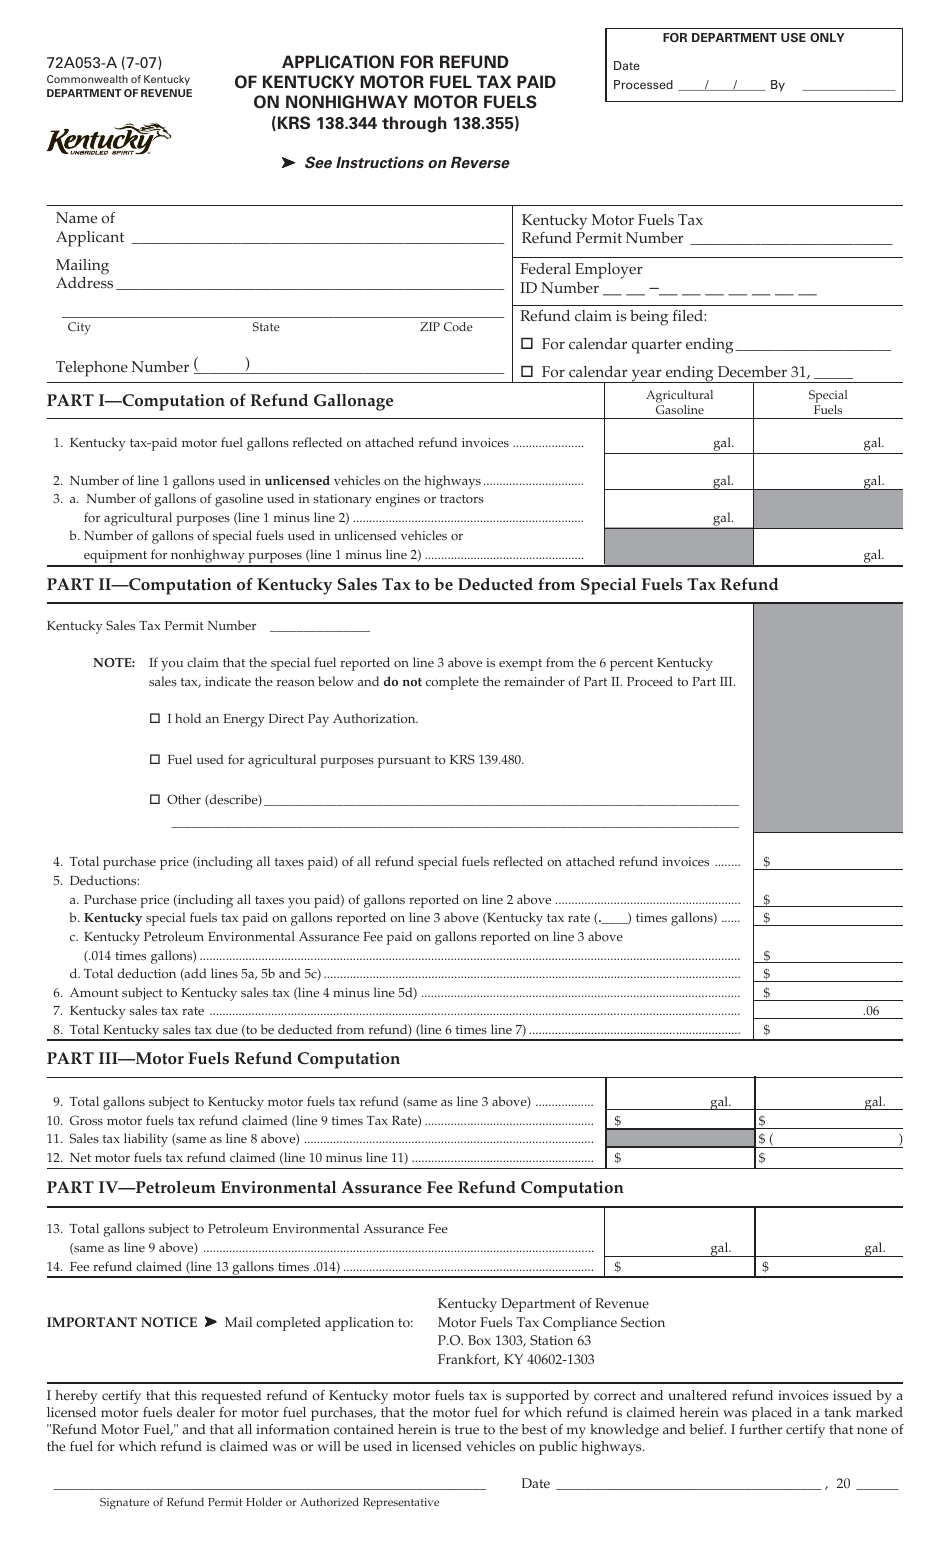 Form 72A053-A Application for Refund of Kentucky Motor Fuel Tax Paid on Nonhighway Motor Fuels - Kentucky, Page 1